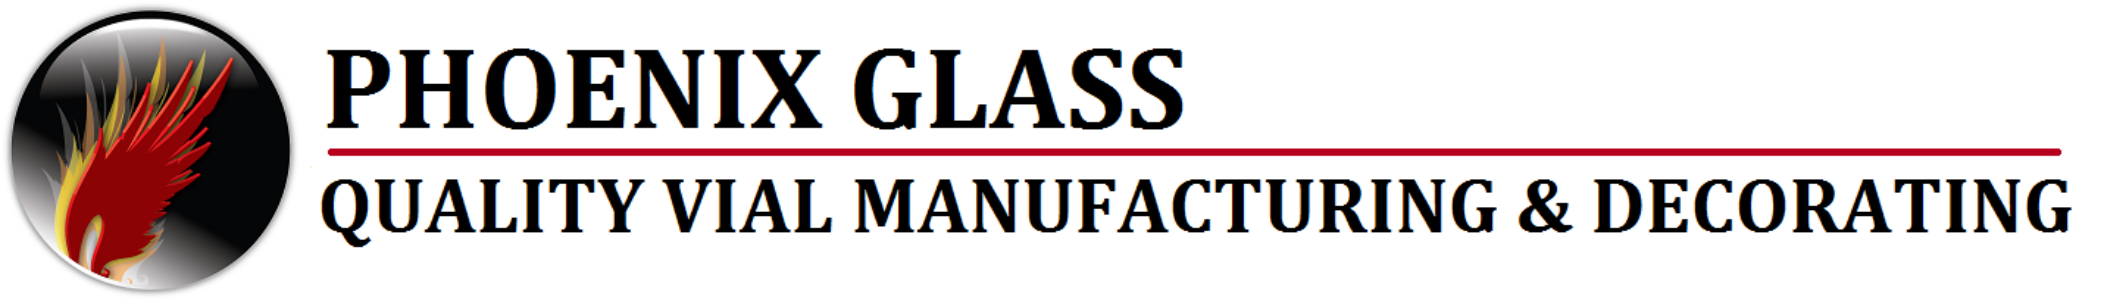 Glass Vial Manufacturing and decorating